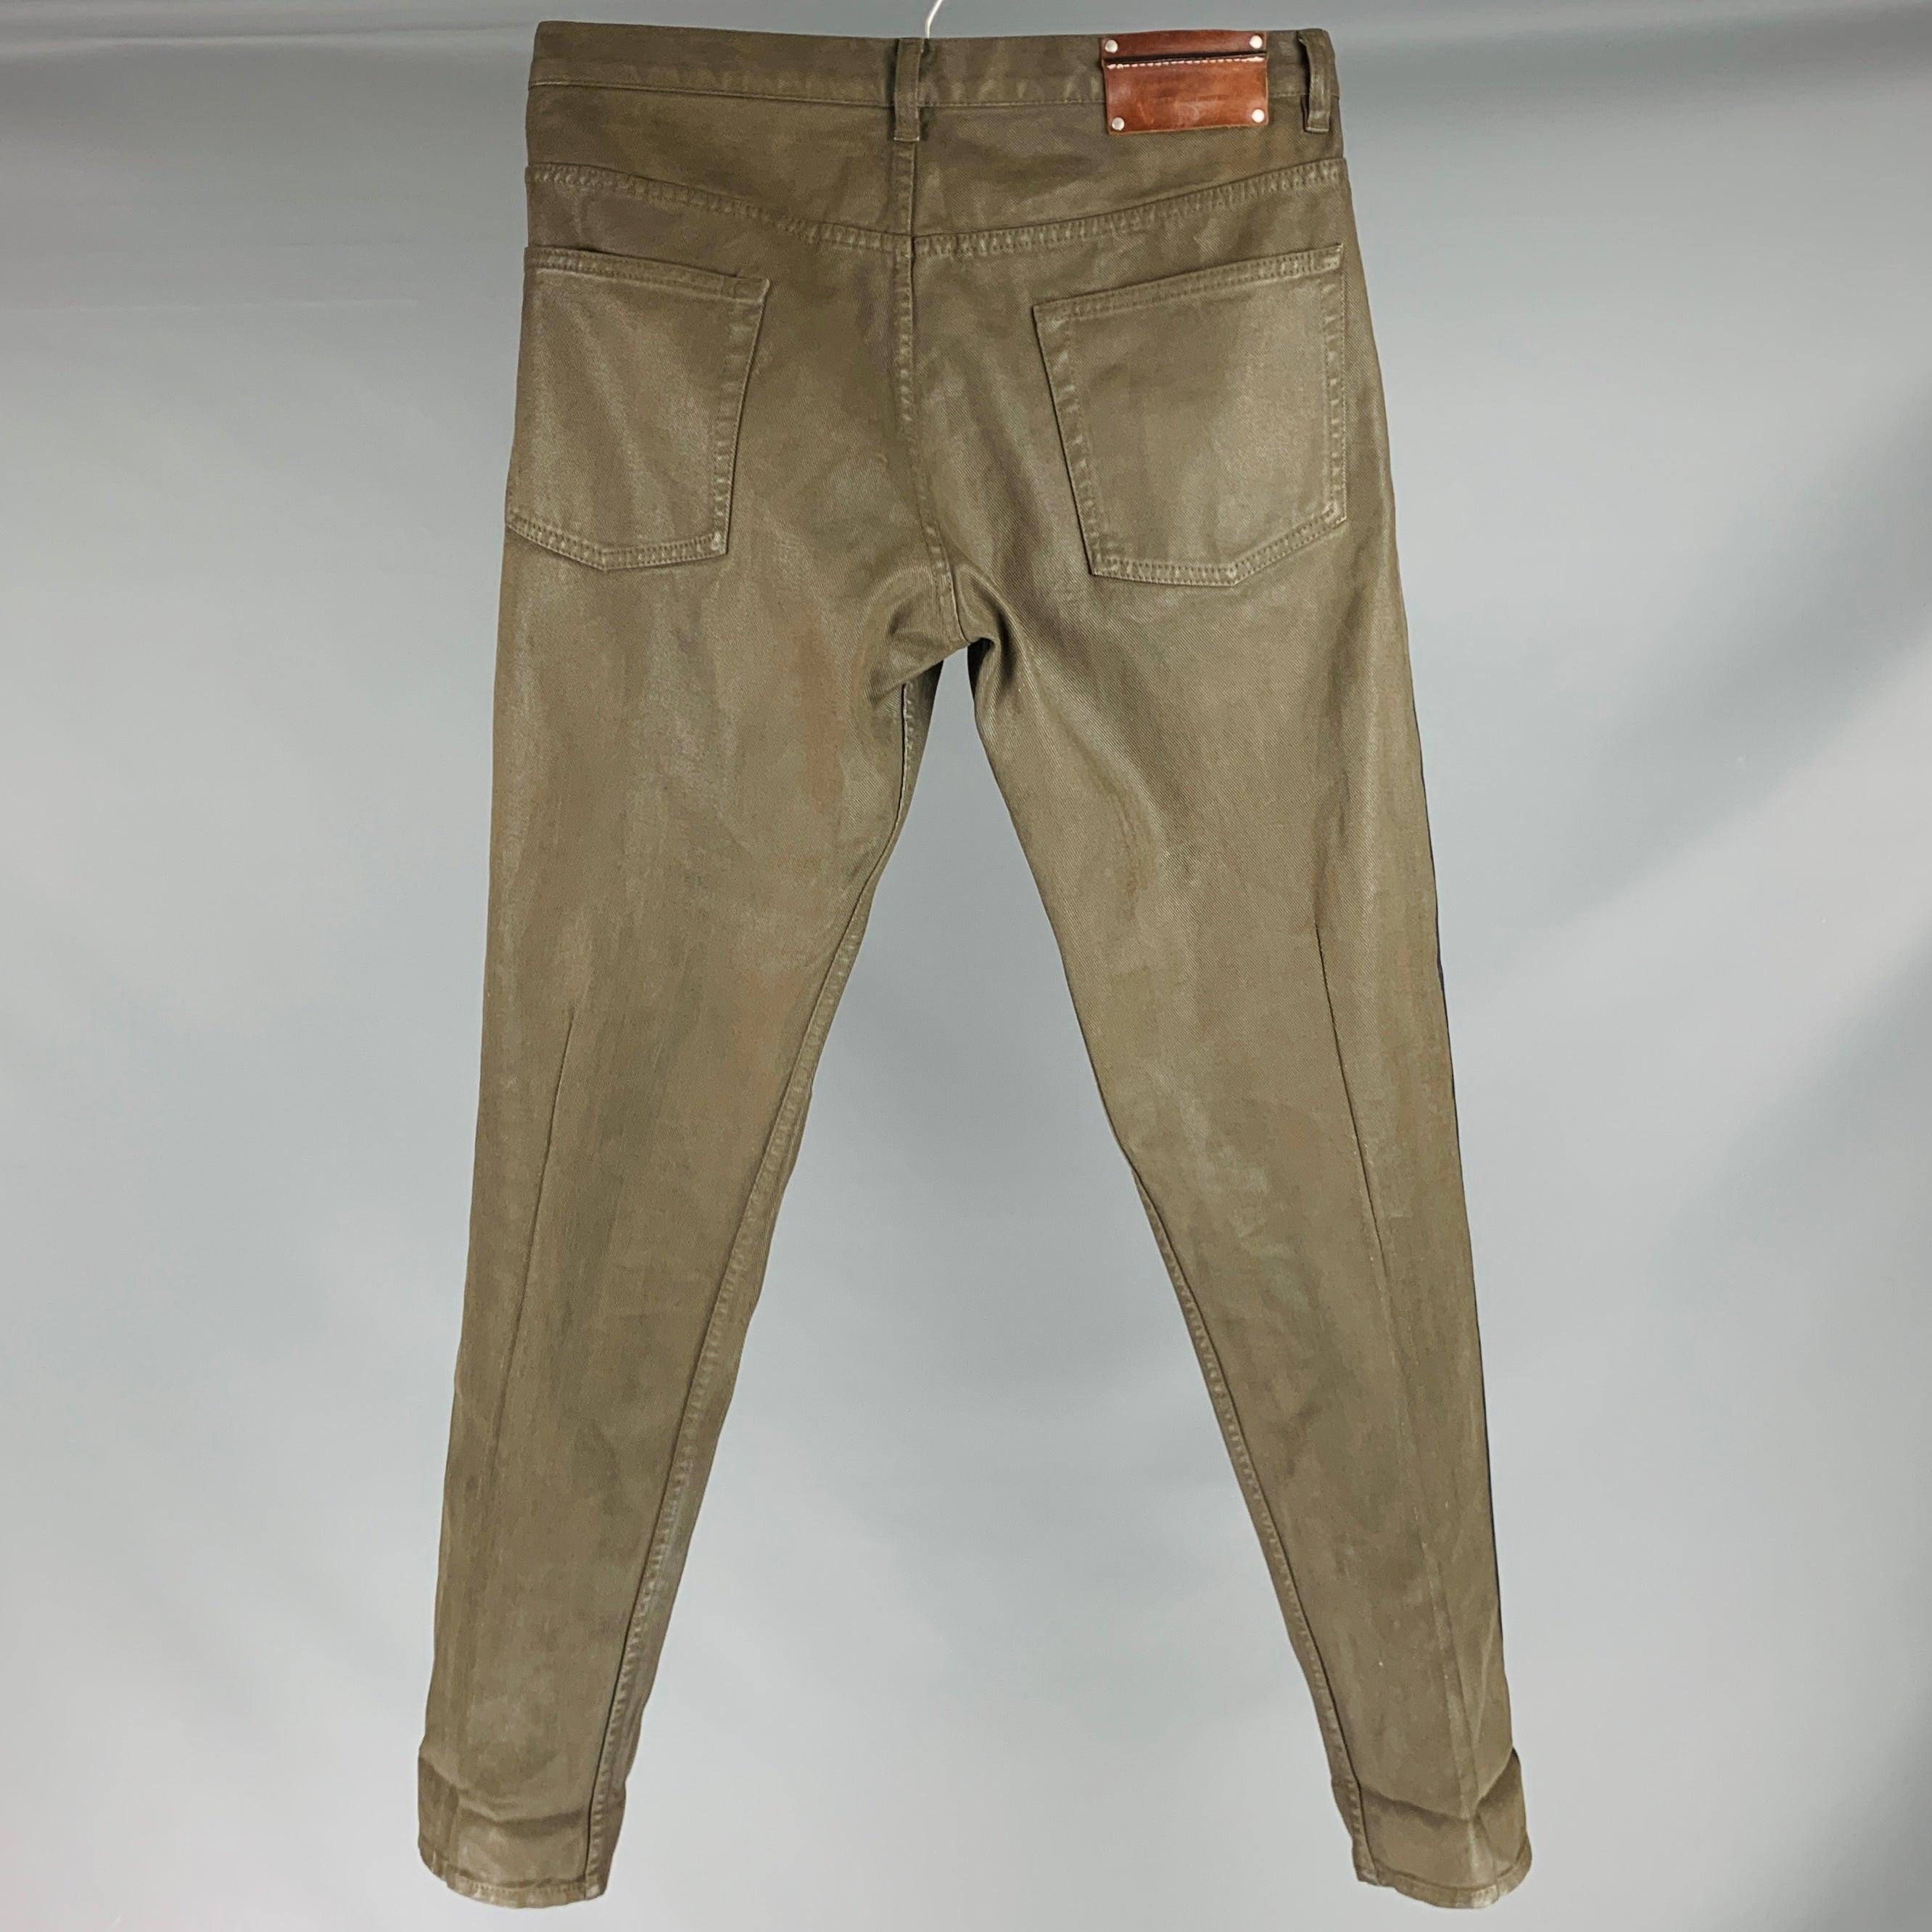 DRIES VAN NOTEN jeans
in an olive green coated cotton fabric featuring a cocoon style, black vertical stripe detail, and button fly closure.Excellent Pre-Owned Condition. 

Marked:   33 

Measurements: 
  Waist: 33 inches Rise: 9 inches Inseam: 32